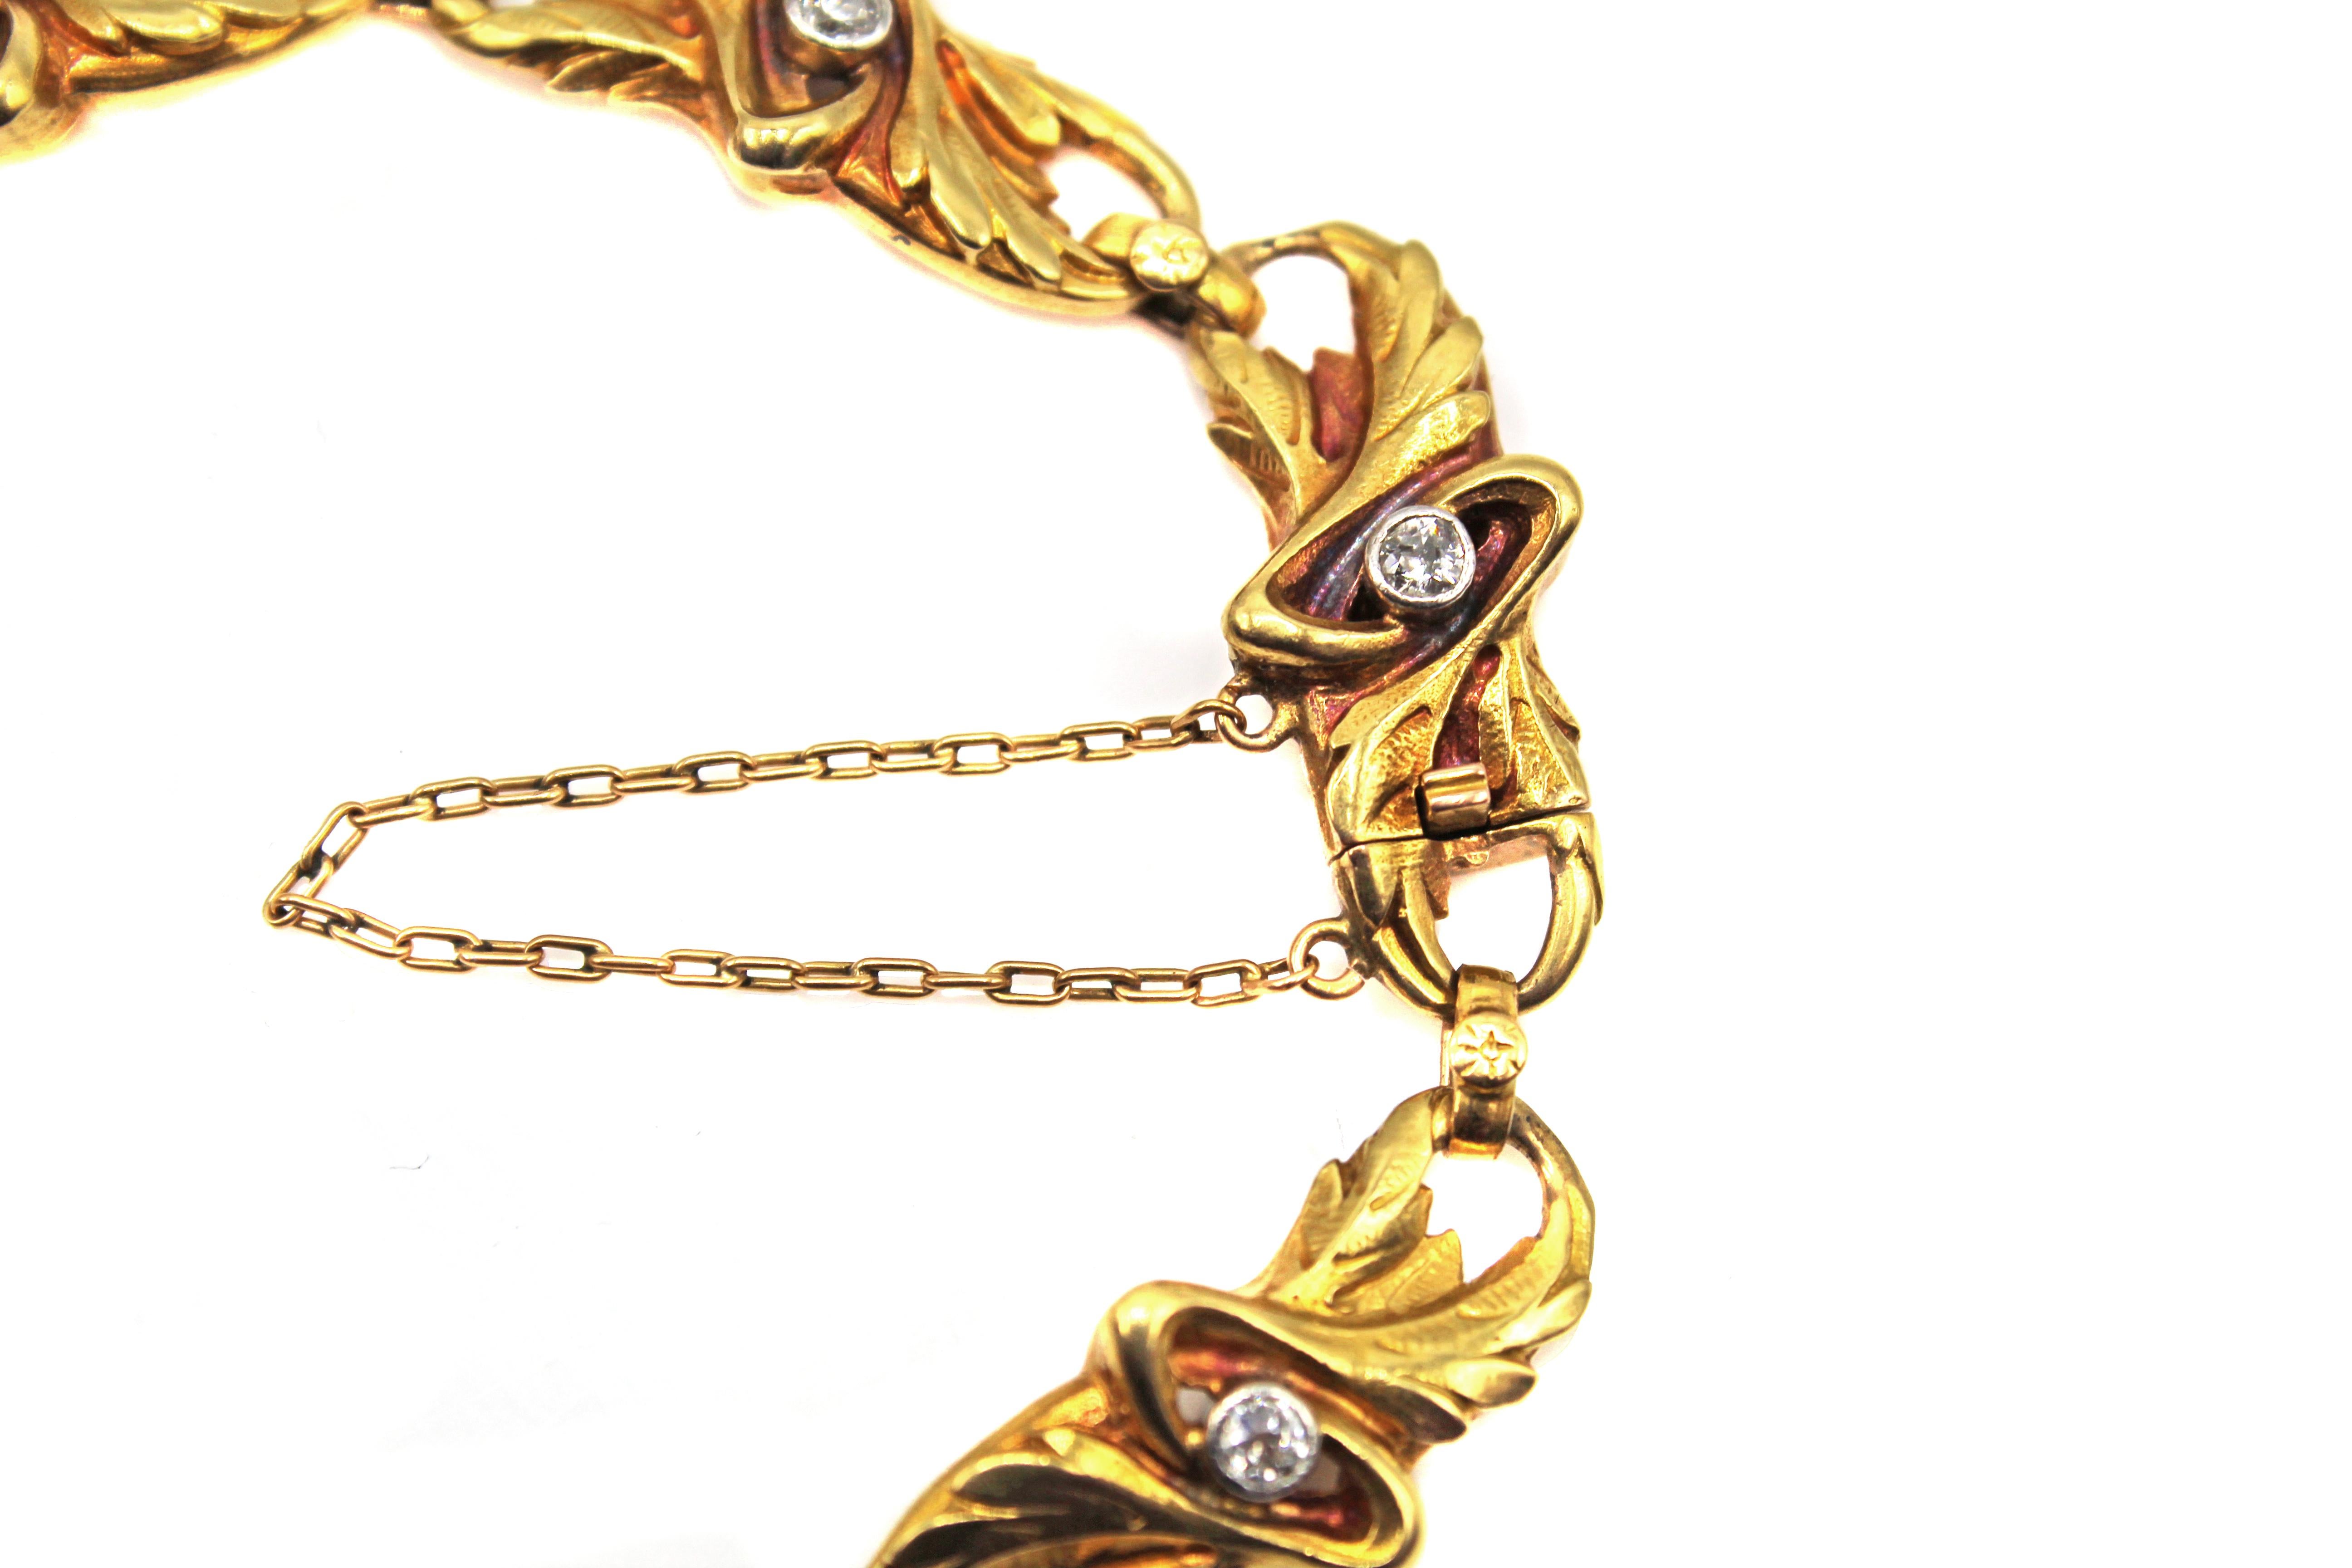 Beautifully handcrafted in 18 karat yellow gold this French Art Nouveau bracelet from ca. 1890 was designed with 7 flexible elements. Each element has a wonderful floral design with intricate hand-engraving and the layered gold-work gives it an